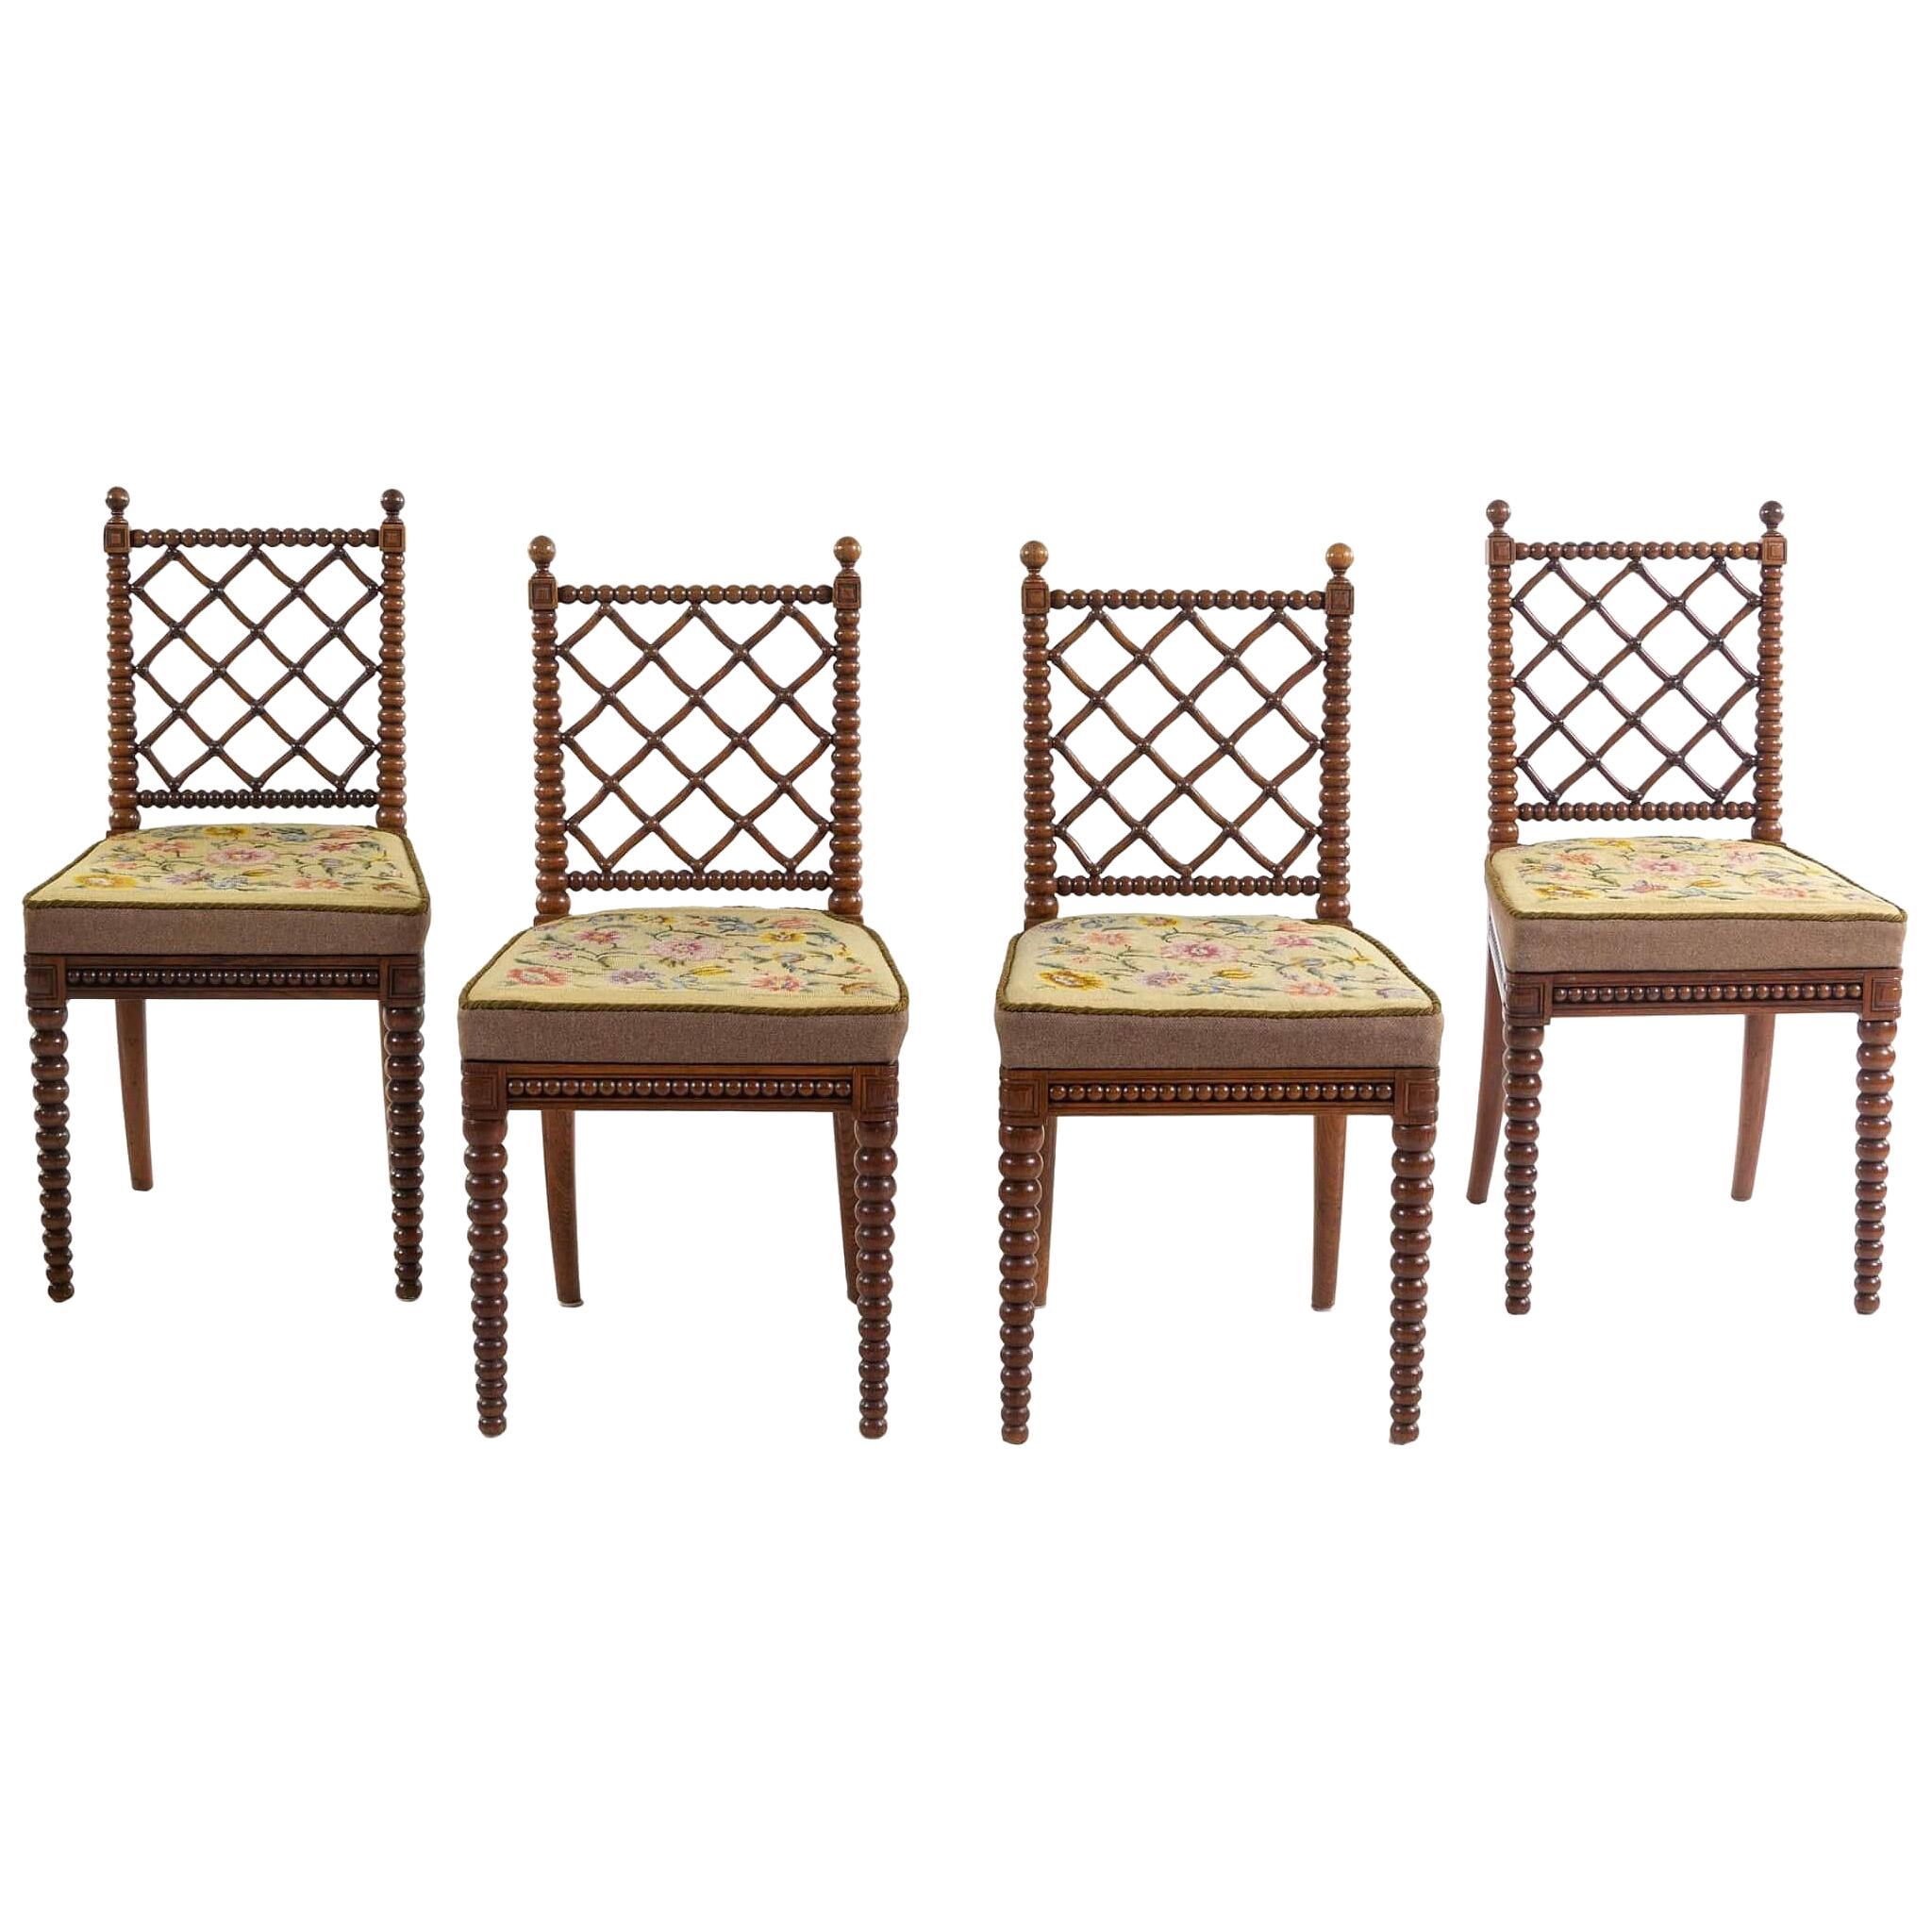 English Regency Oak Bobbin Chairs Attributed to Gillows, Set of Four, circa 1825